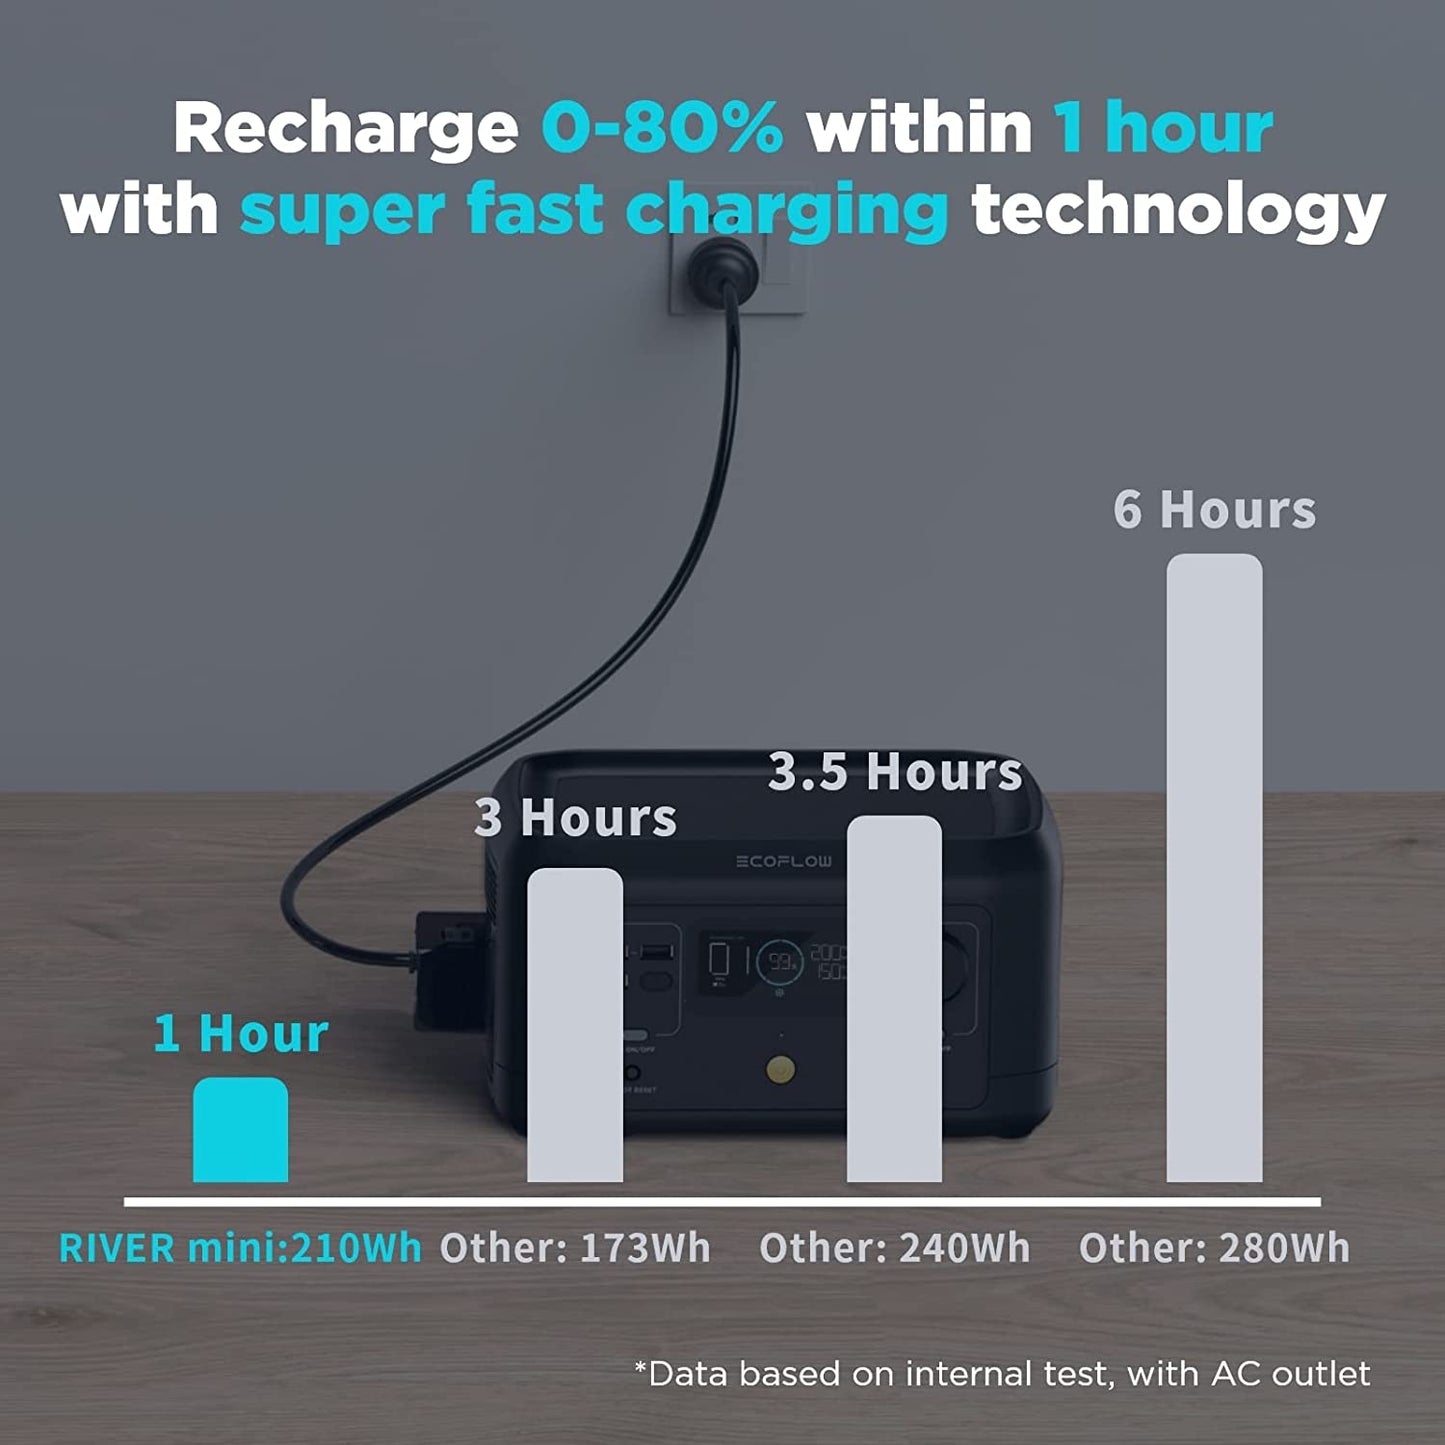 Recharge 0-80% within 1 hour with super fast charging technology 